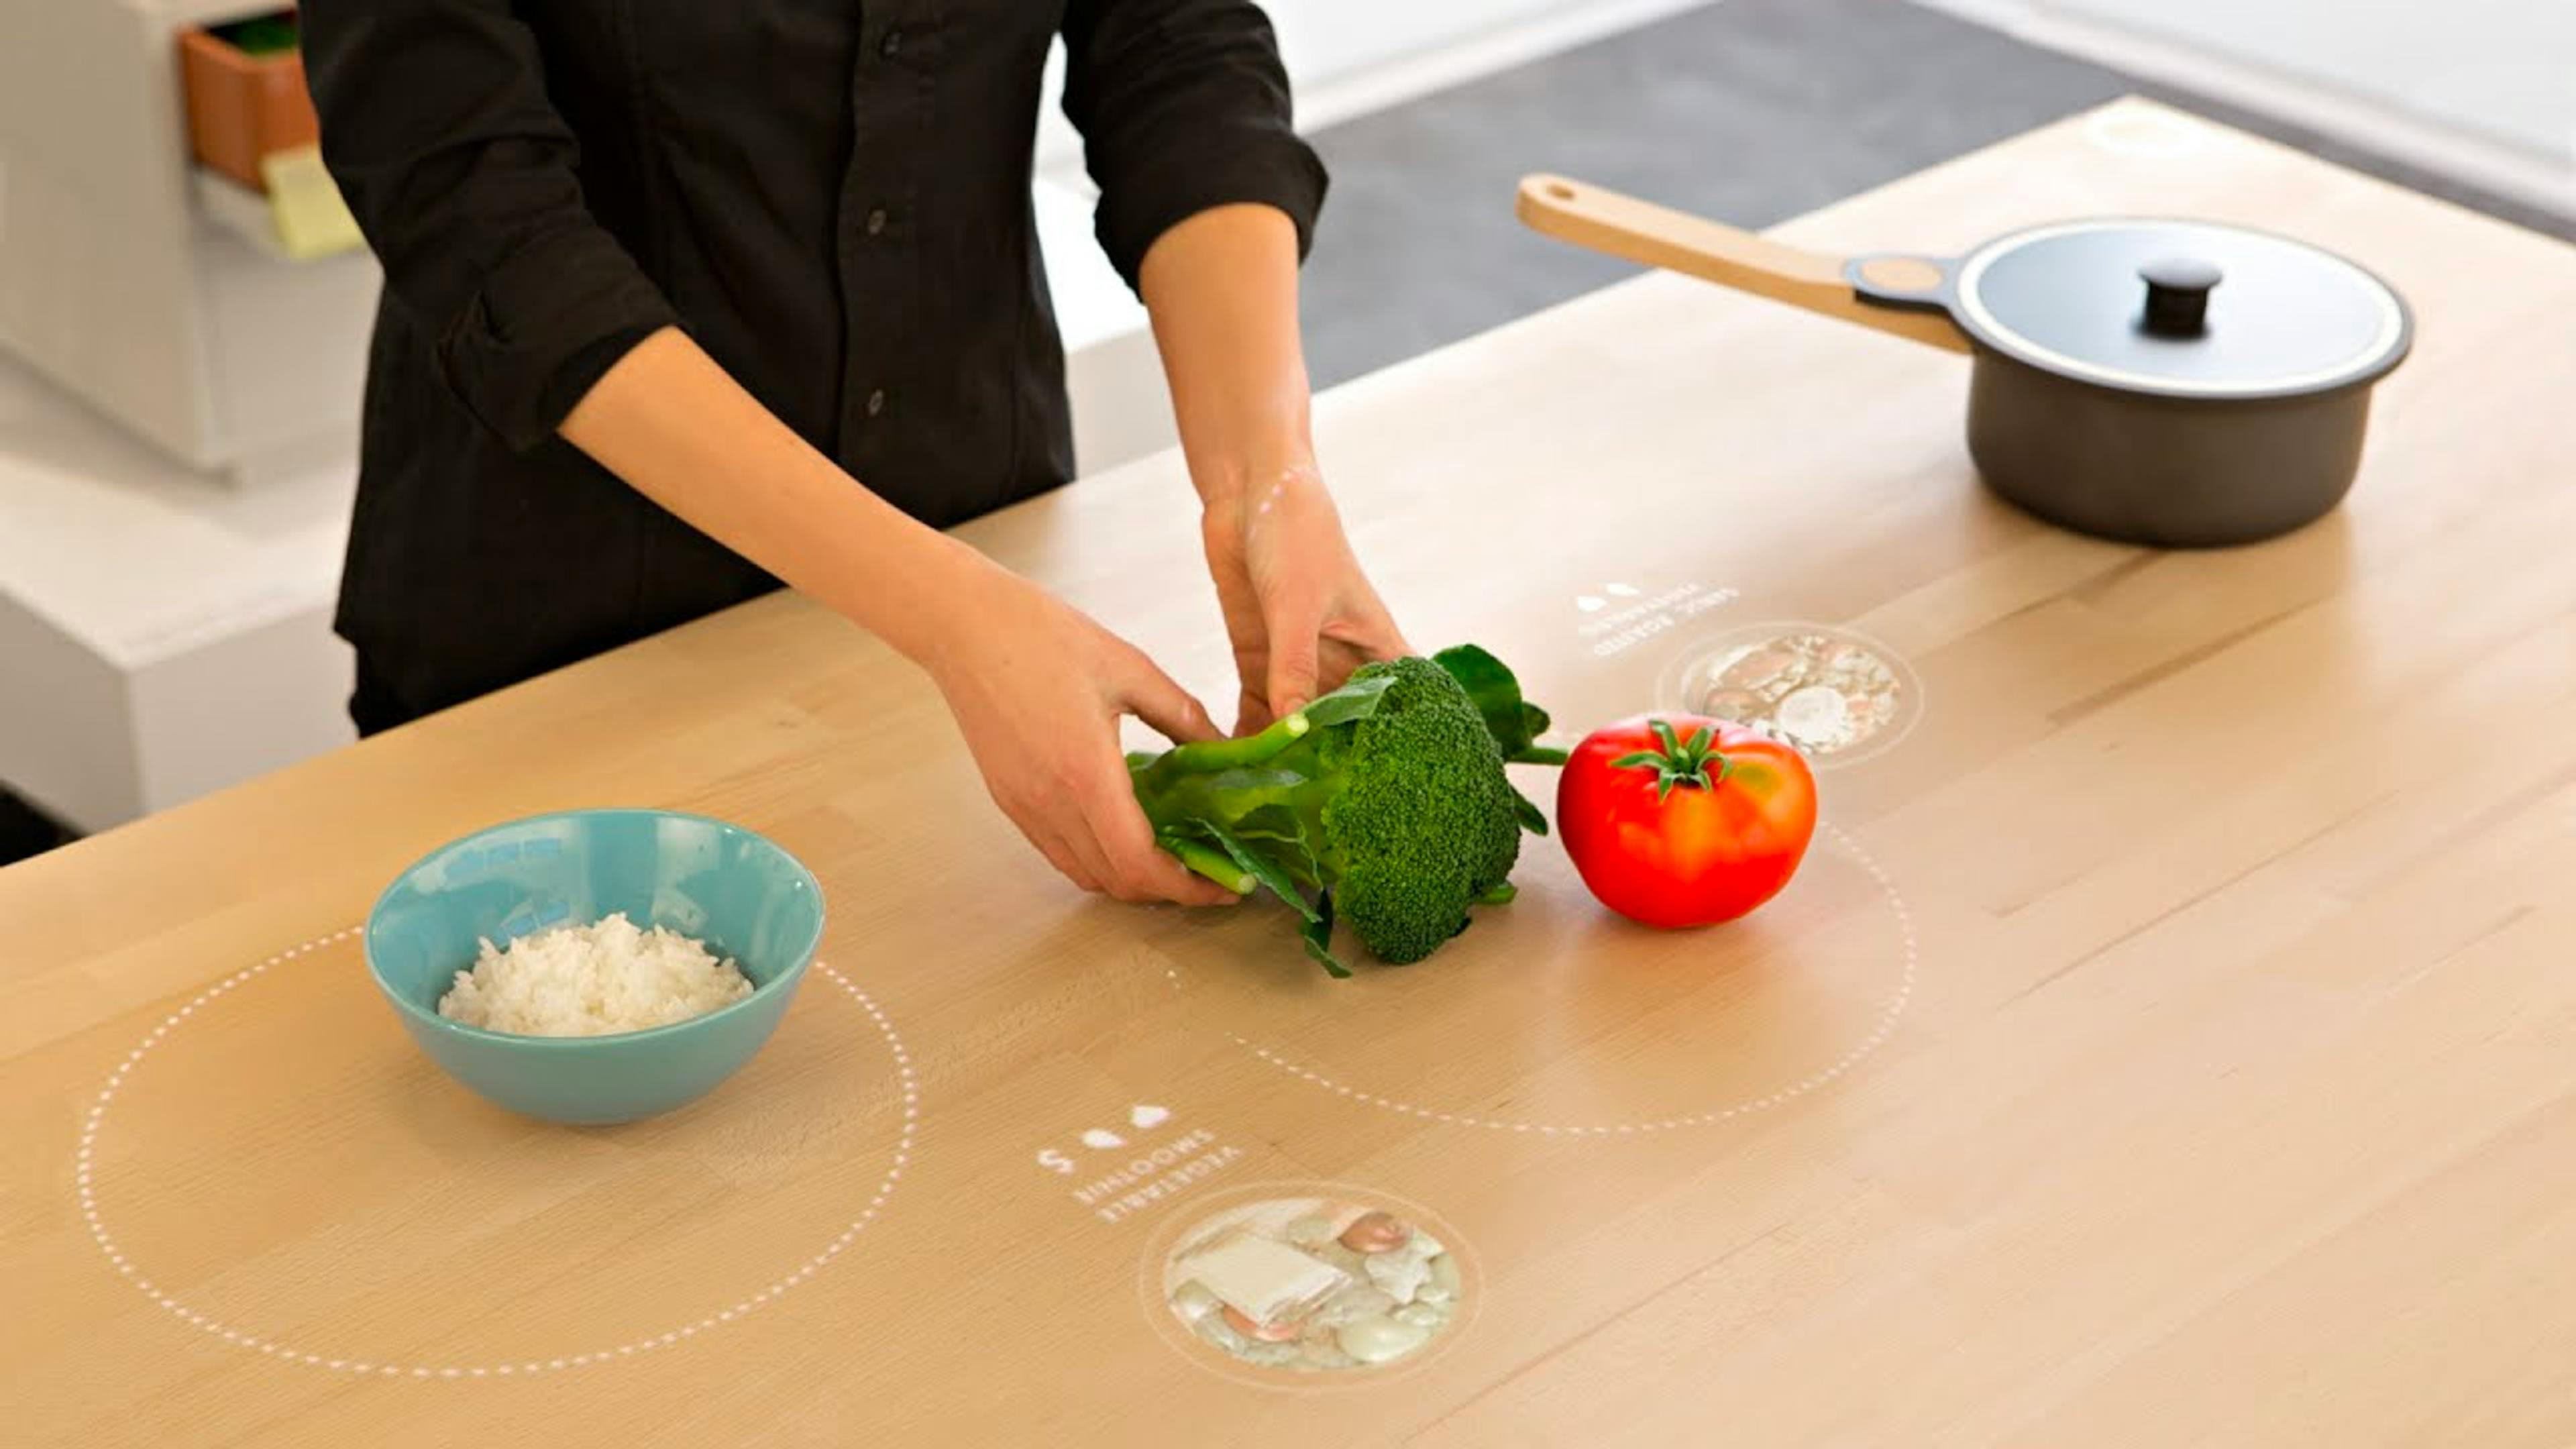 IKEA AR cooking concept